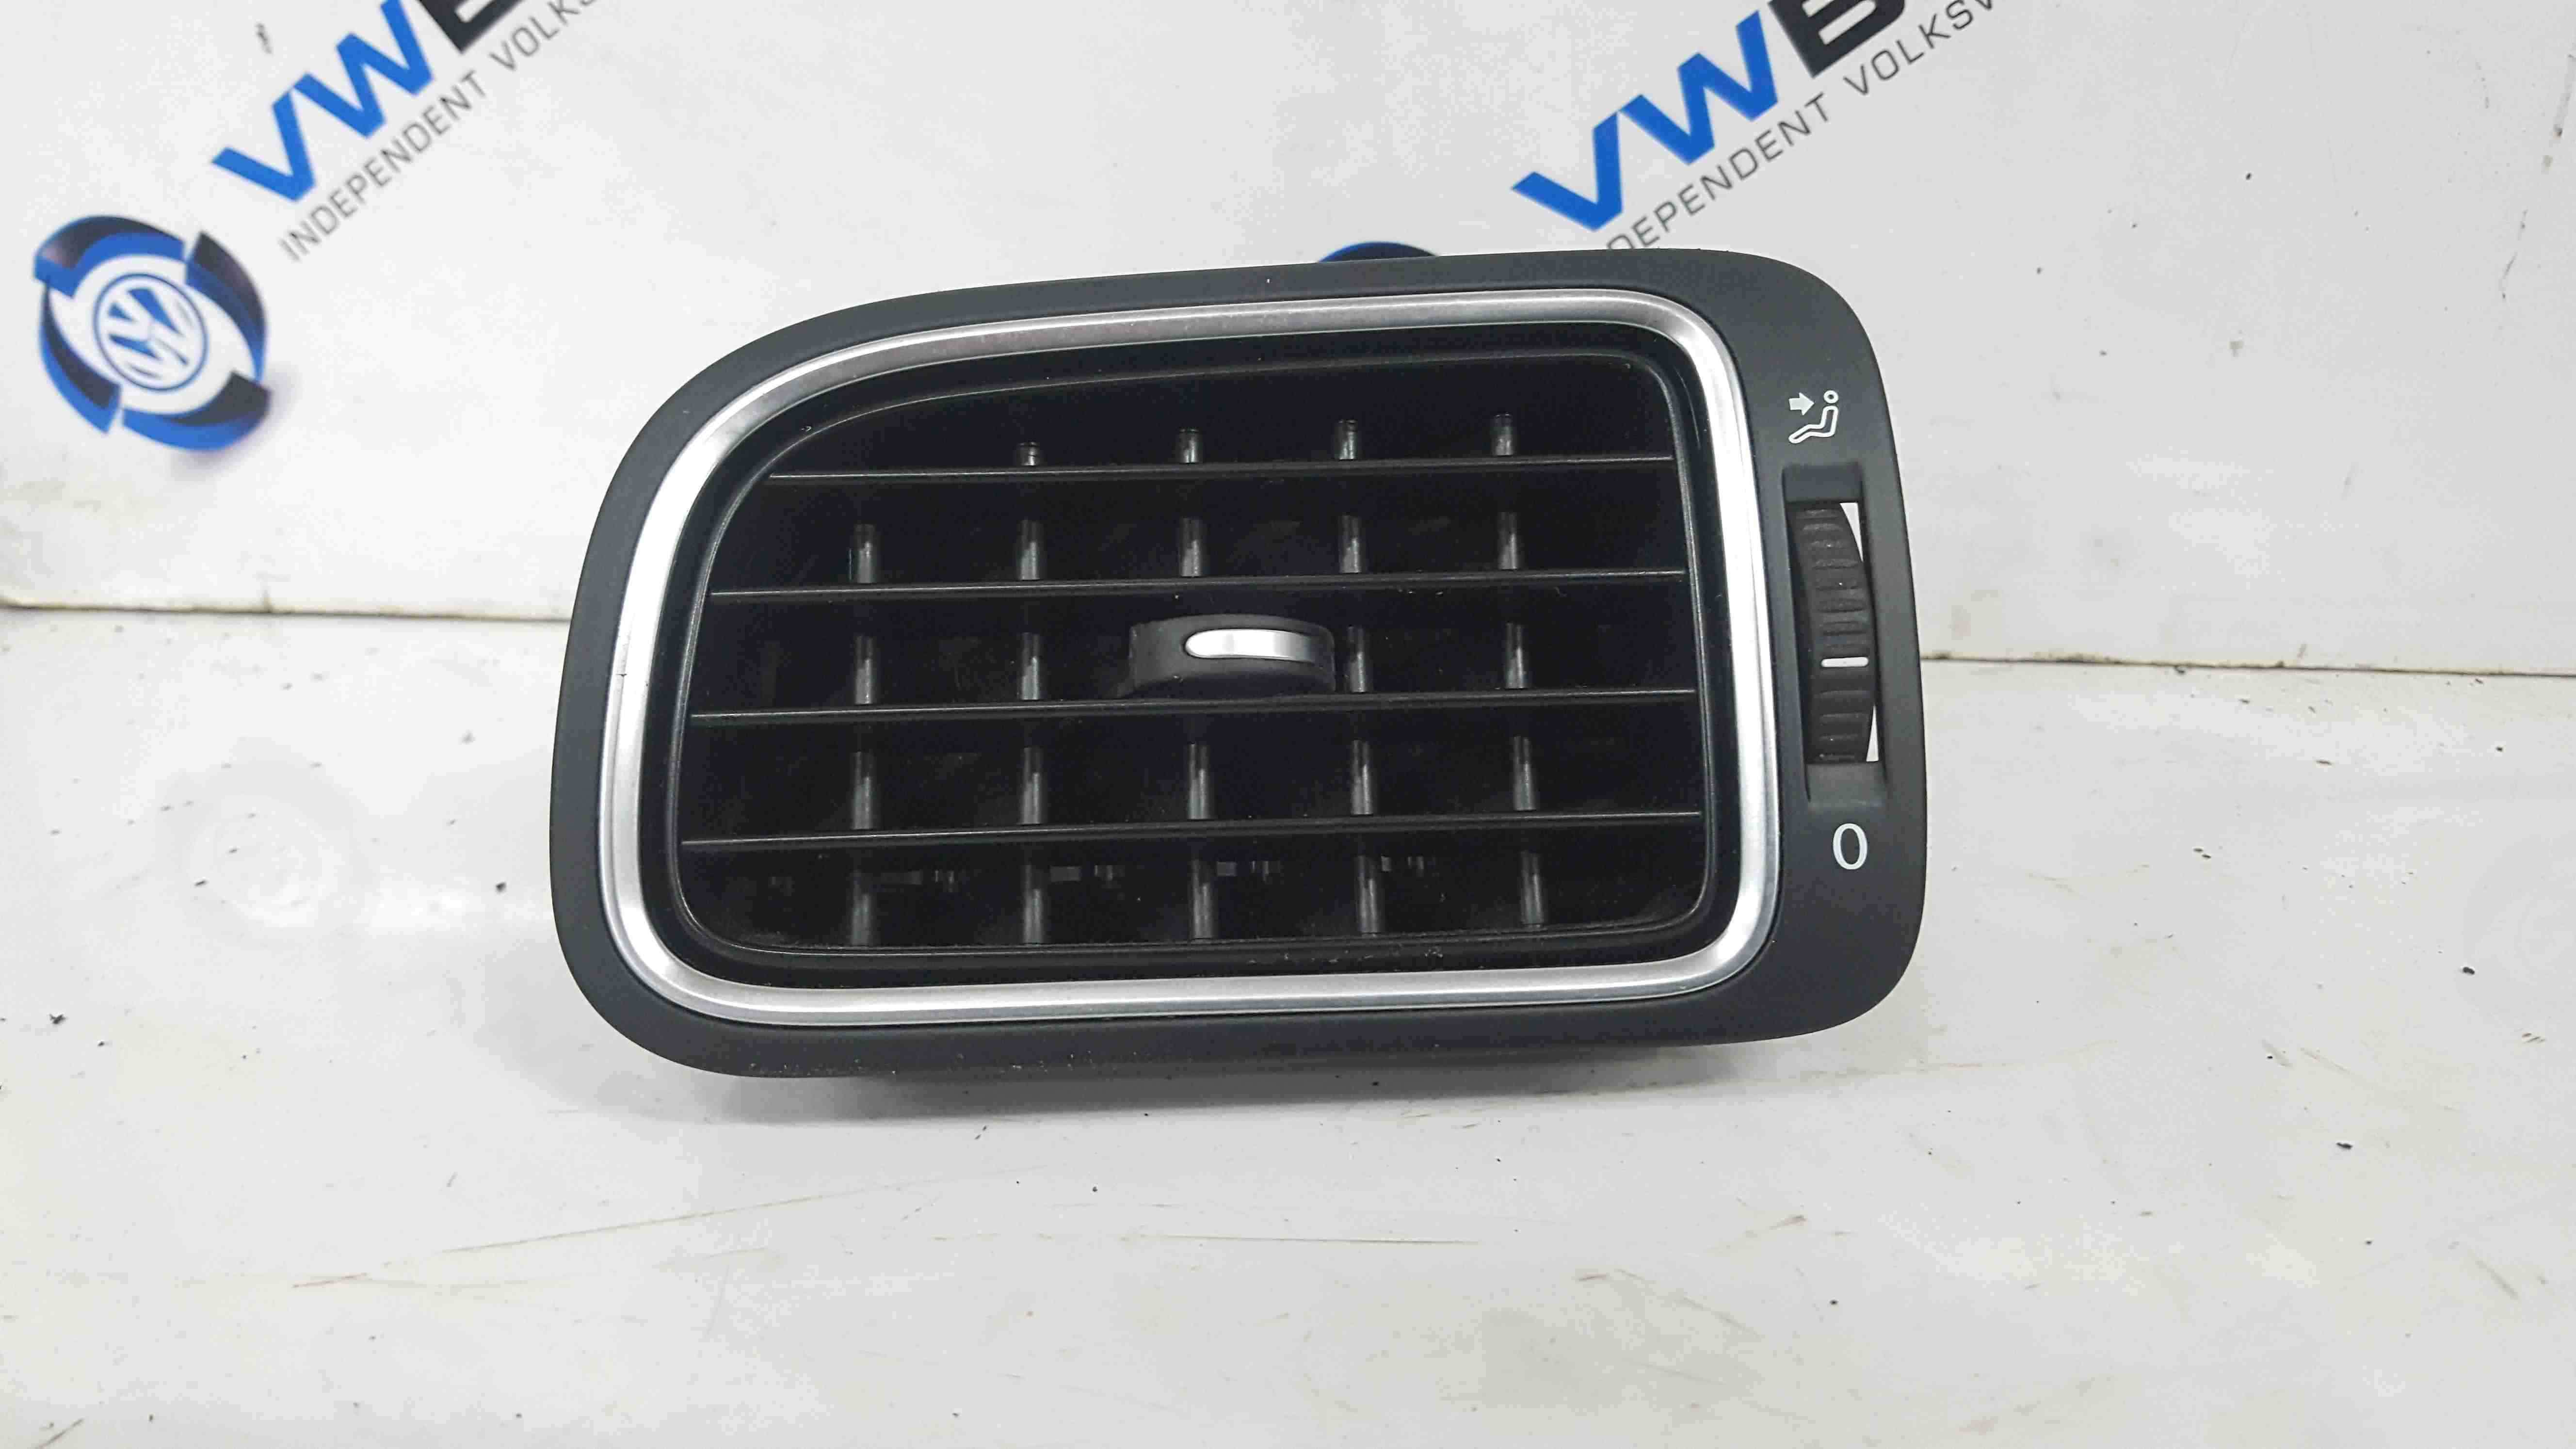 Volkswagen Polo 6R 2009-2012 Passenger NSF Front Heater Air Vent 6RF819703A